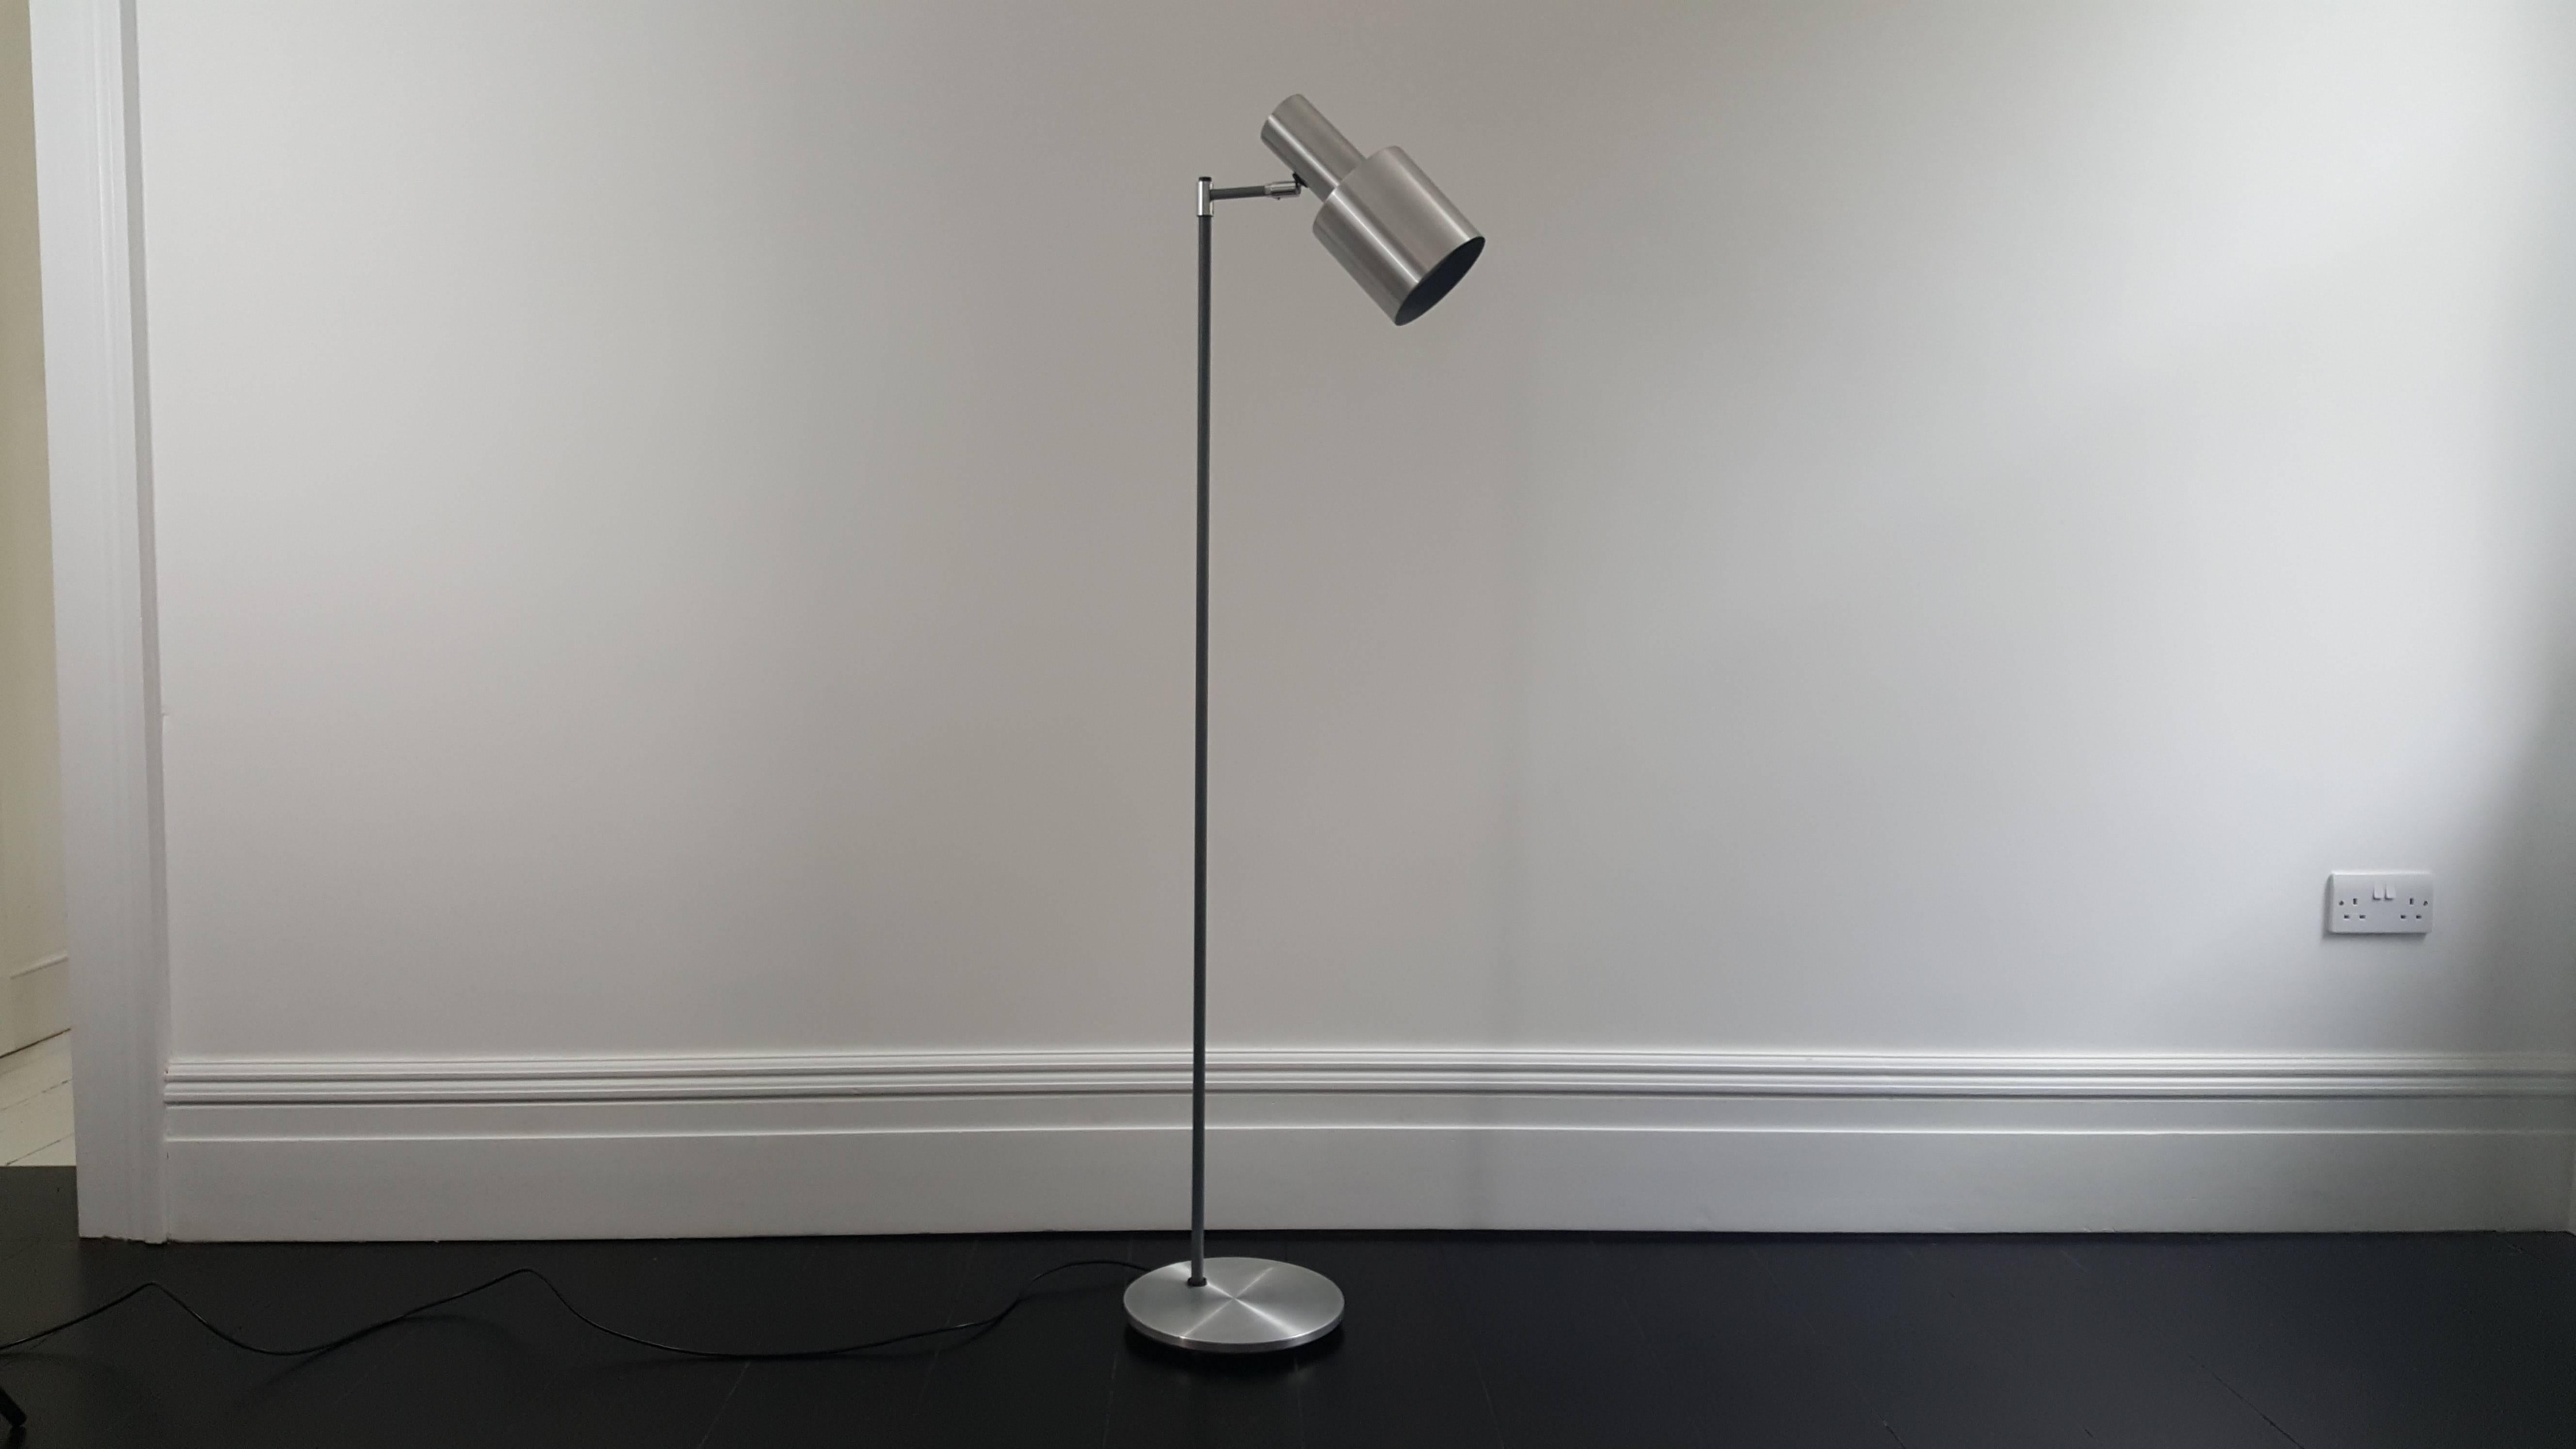 Beautiful aluminium 'Studio' floor lamp. Designed by Jo Hammerborg for Fog & Mørup and released in the 1960s.

In 1957 Hammerborg became head of design at Fog & Mørup. His incumbency in this role was to prove the most successful period in the